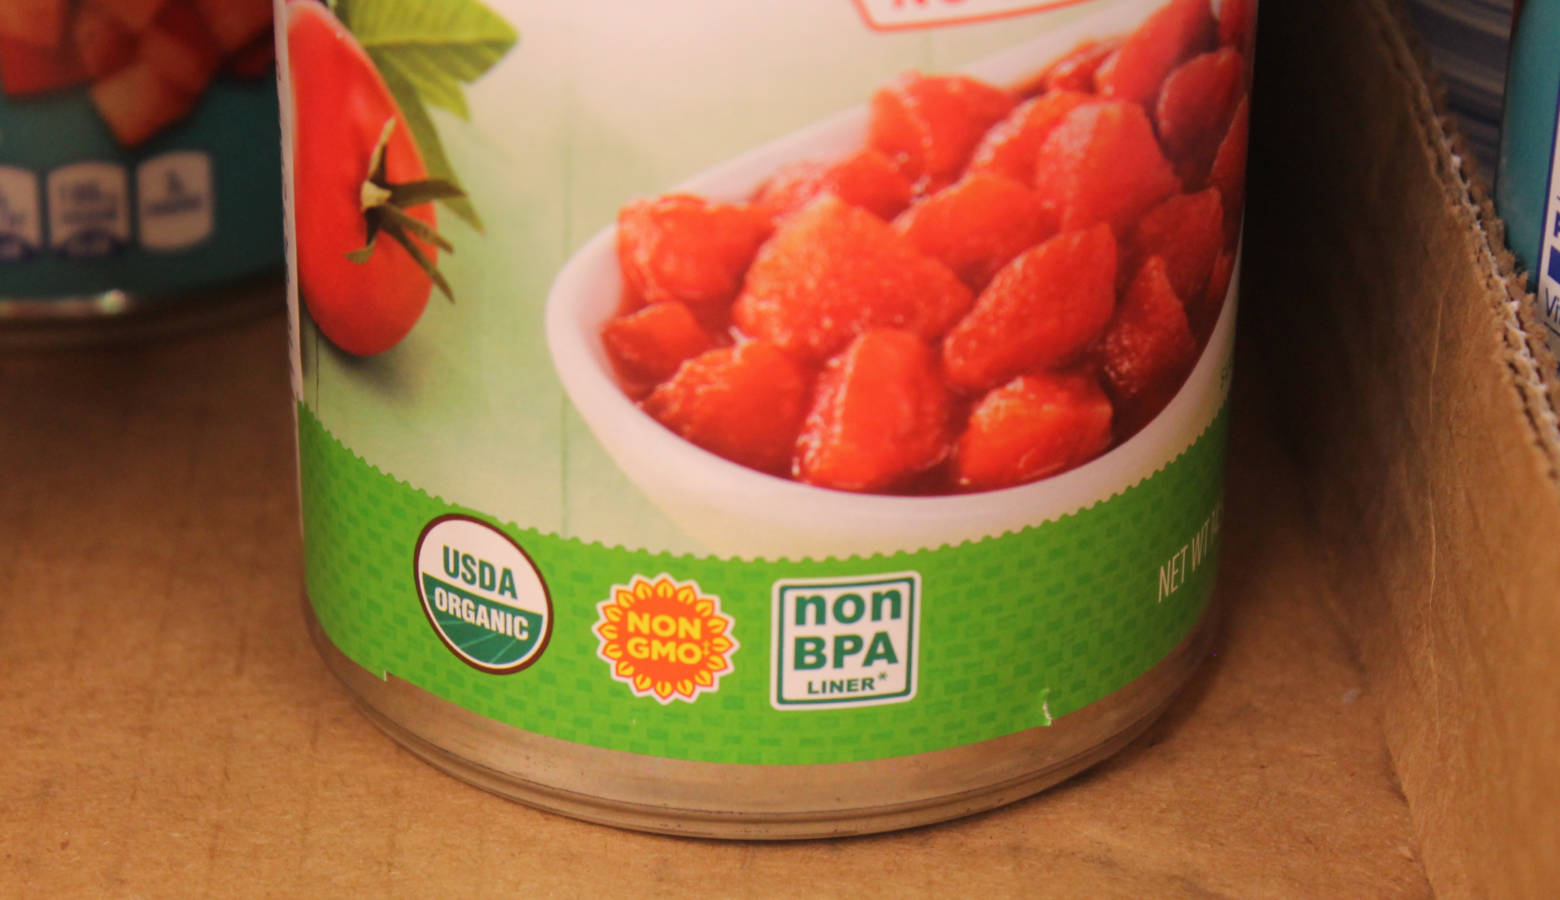 A can of store-brand diced tomatoes includes three different food labels. A new study from Purdue seeks to examine how labels and certification can affect prices and consumer choice. (Lauren Chapman/IPB News)